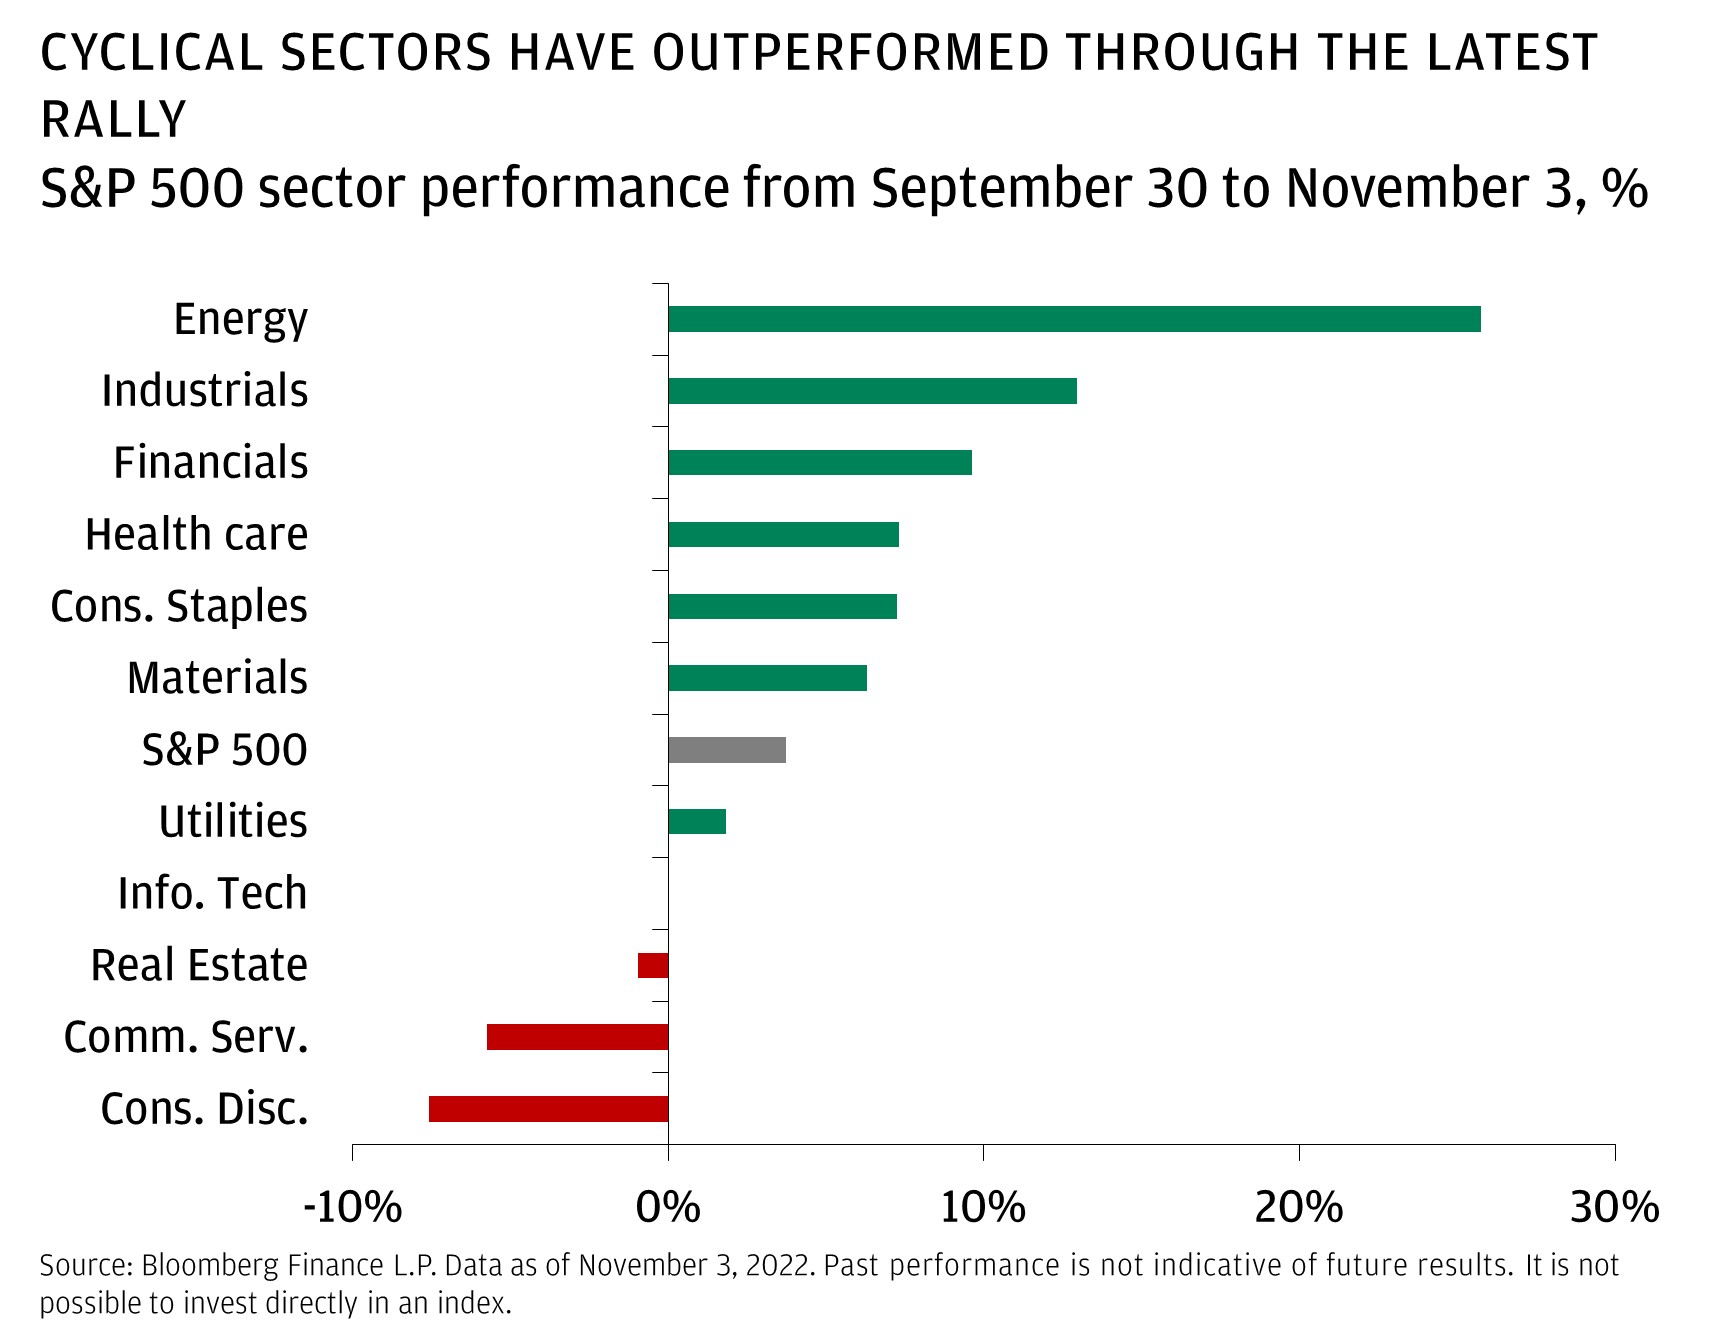 This chart shows the S&P 500 sector performance from September 30 to November 3.